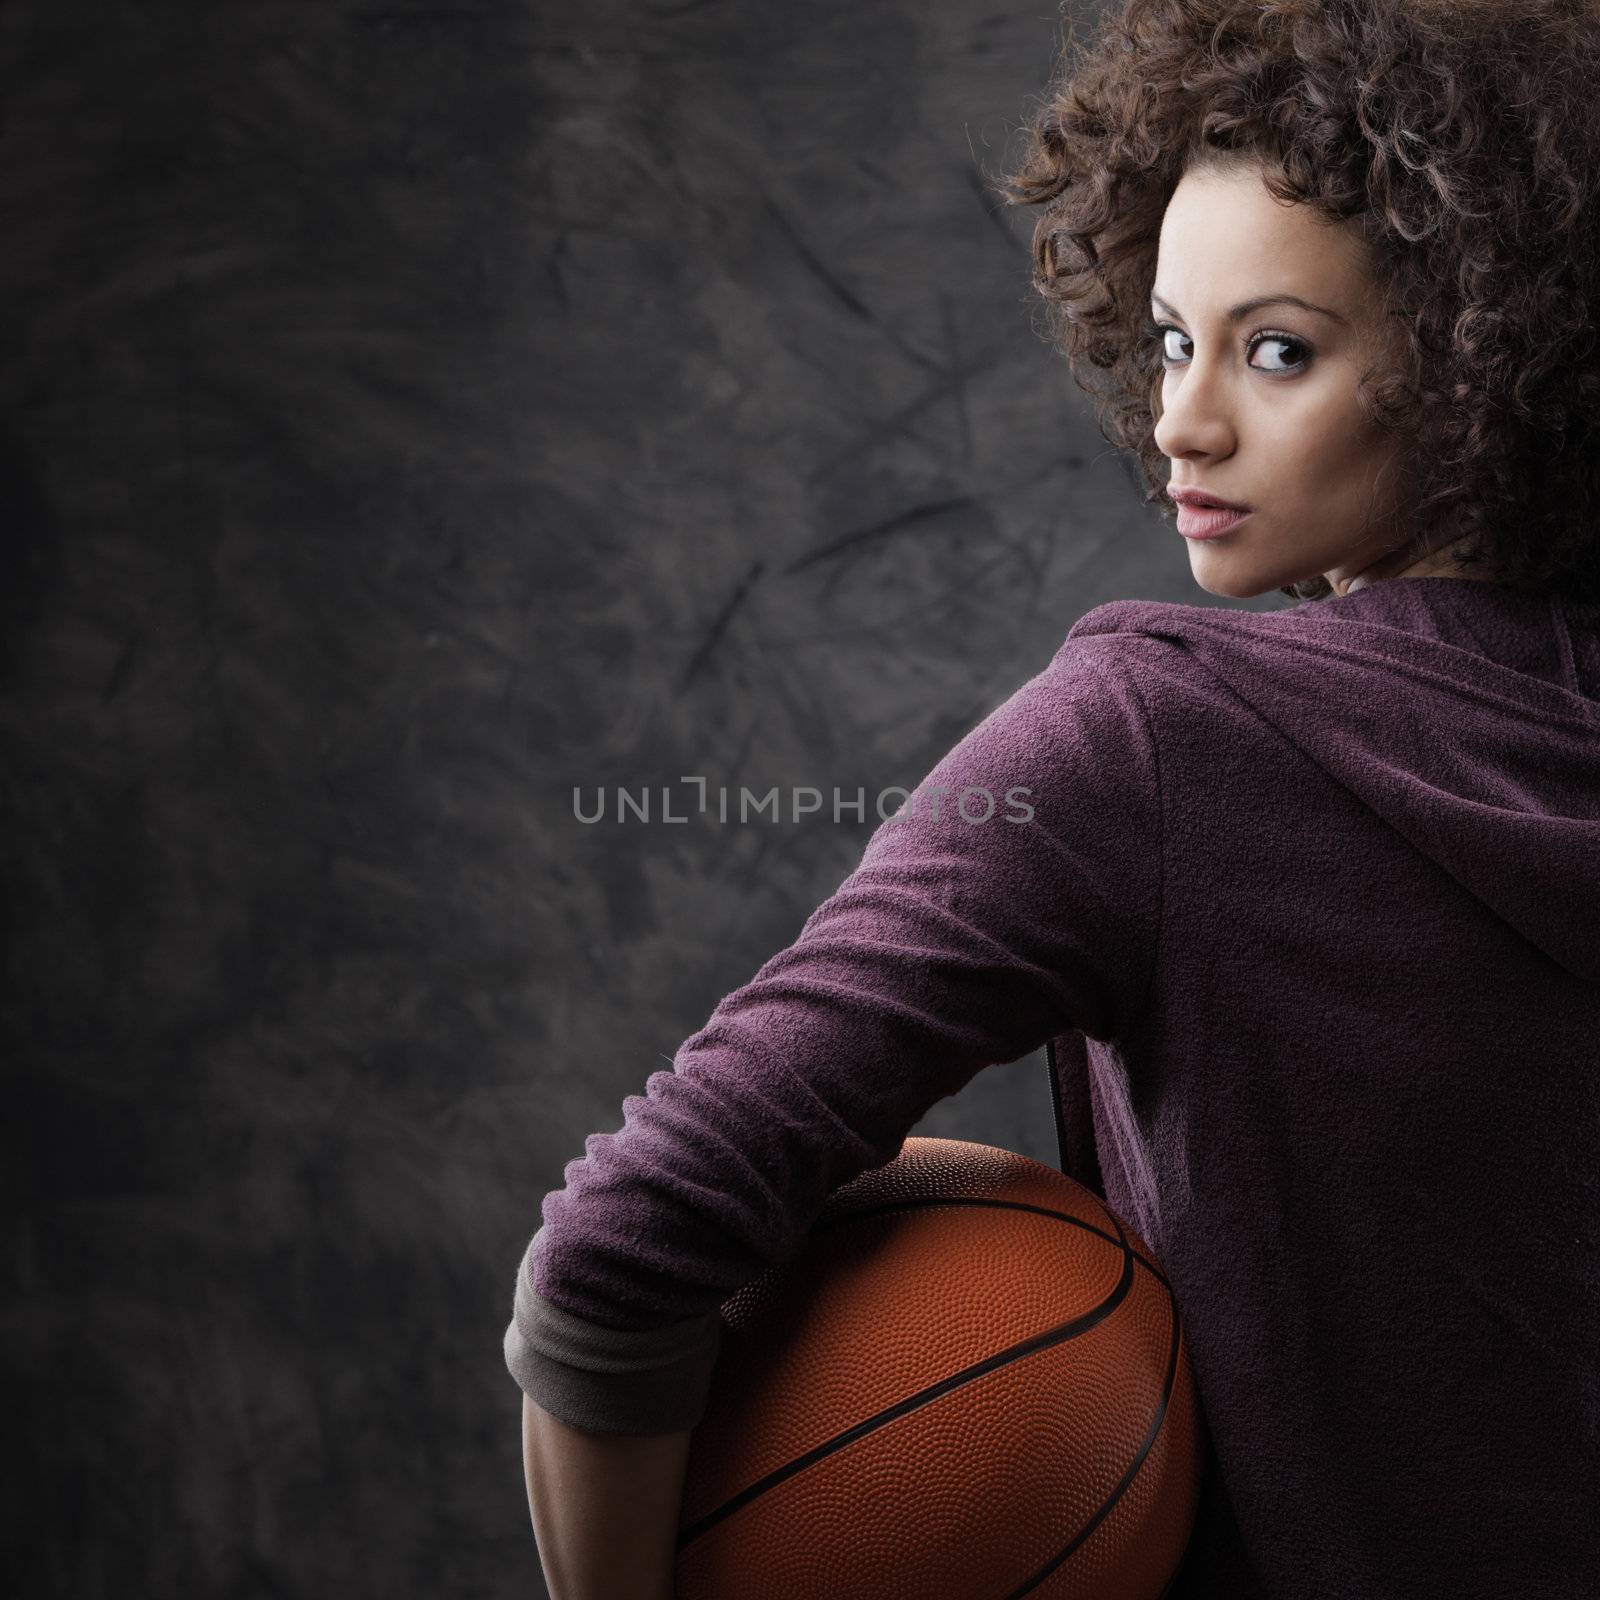 Portrait of young beautiful woman holding a basketball